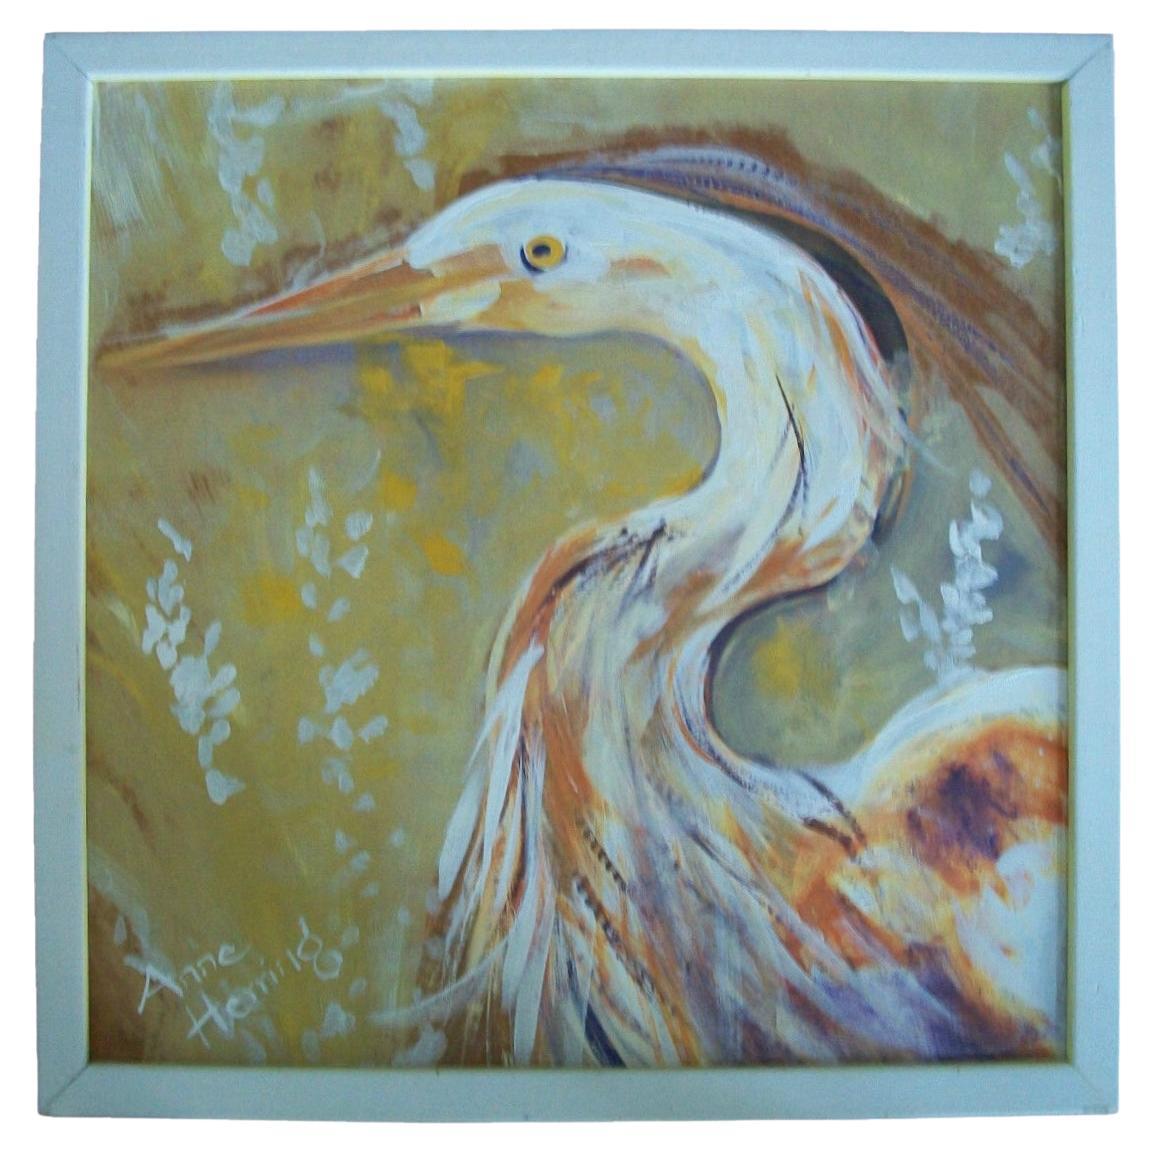 ANNE HERRING - 'Full Plumage' - Framed Acrylic Painting - U.S.A. - 20th Century